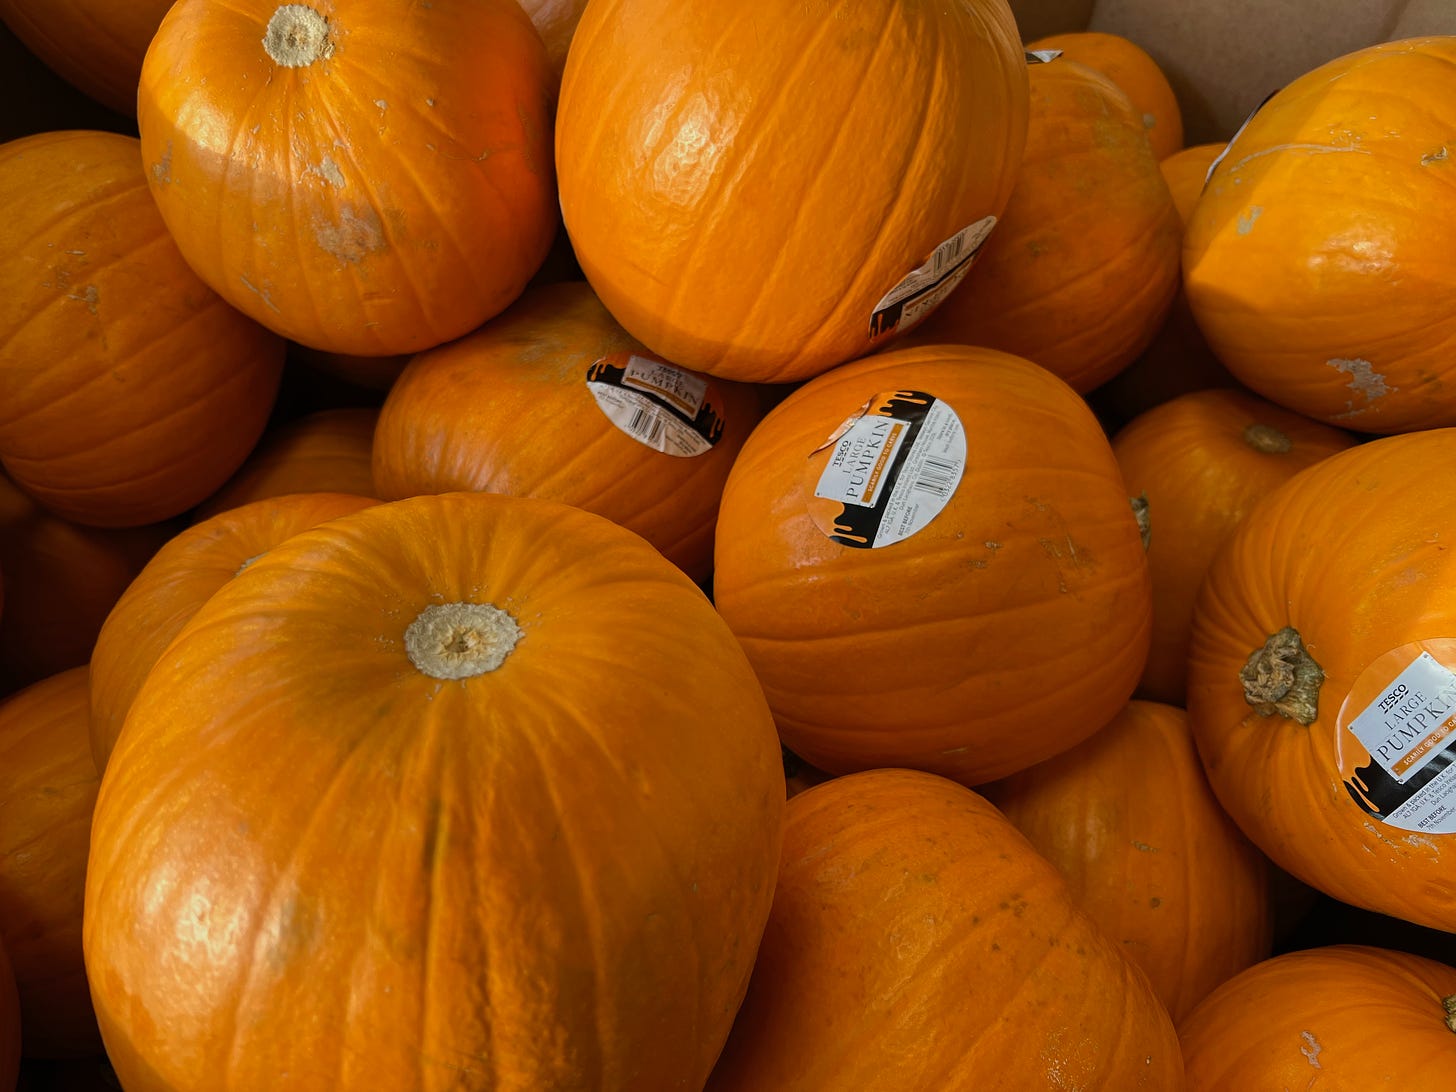 pumpkins on sale in a supermarket in the UK